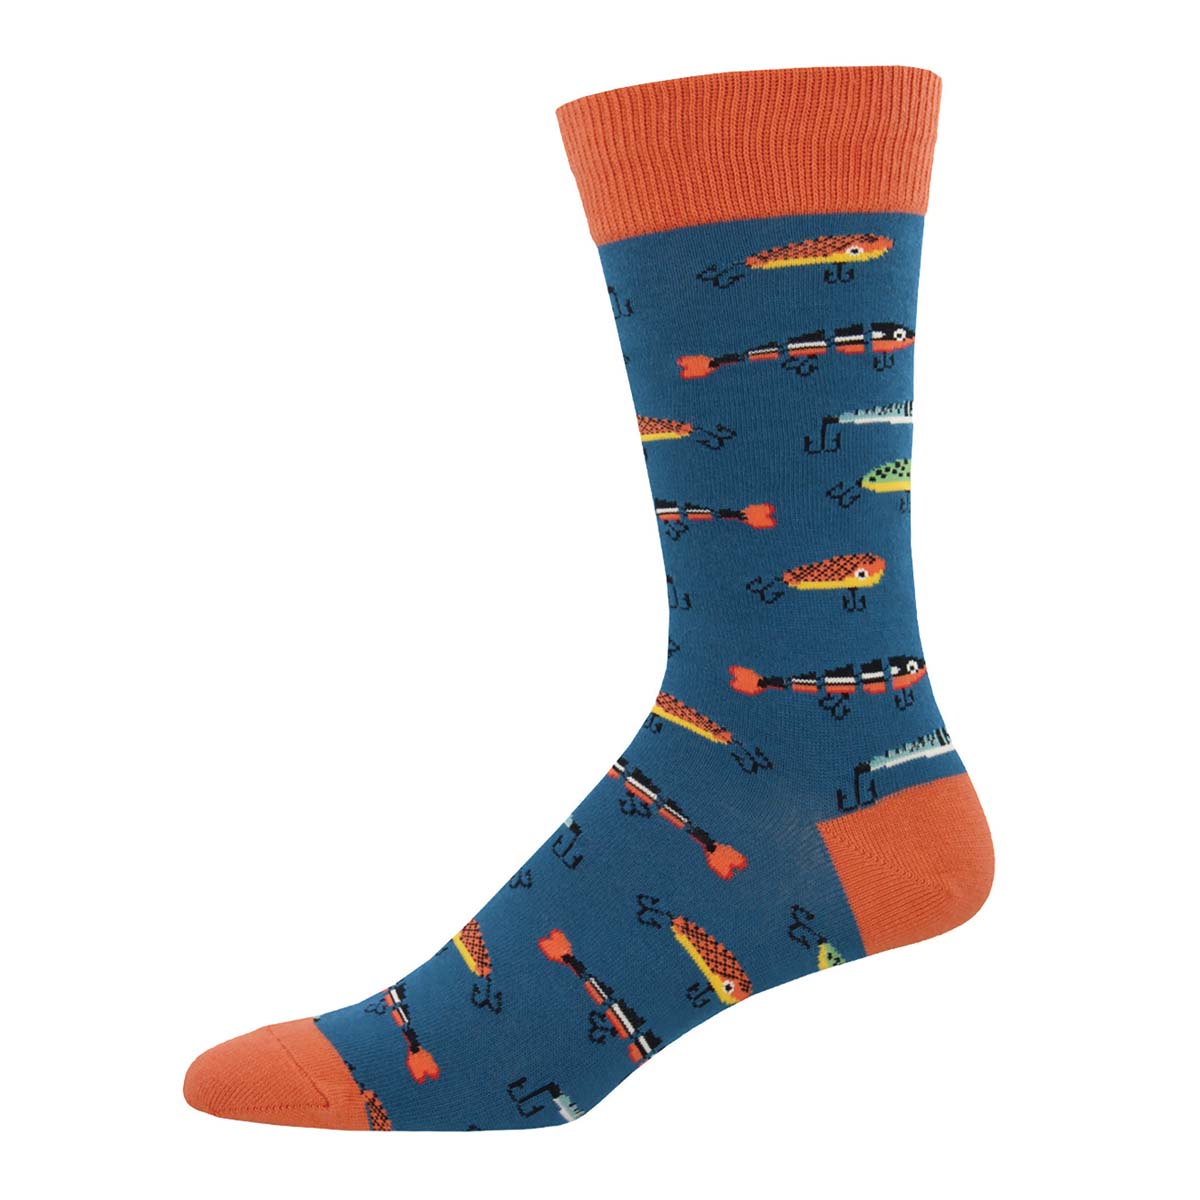 Fishing Gifts for Men and Women Fly Fishing Accessories Fish Novelty Crew  Socks